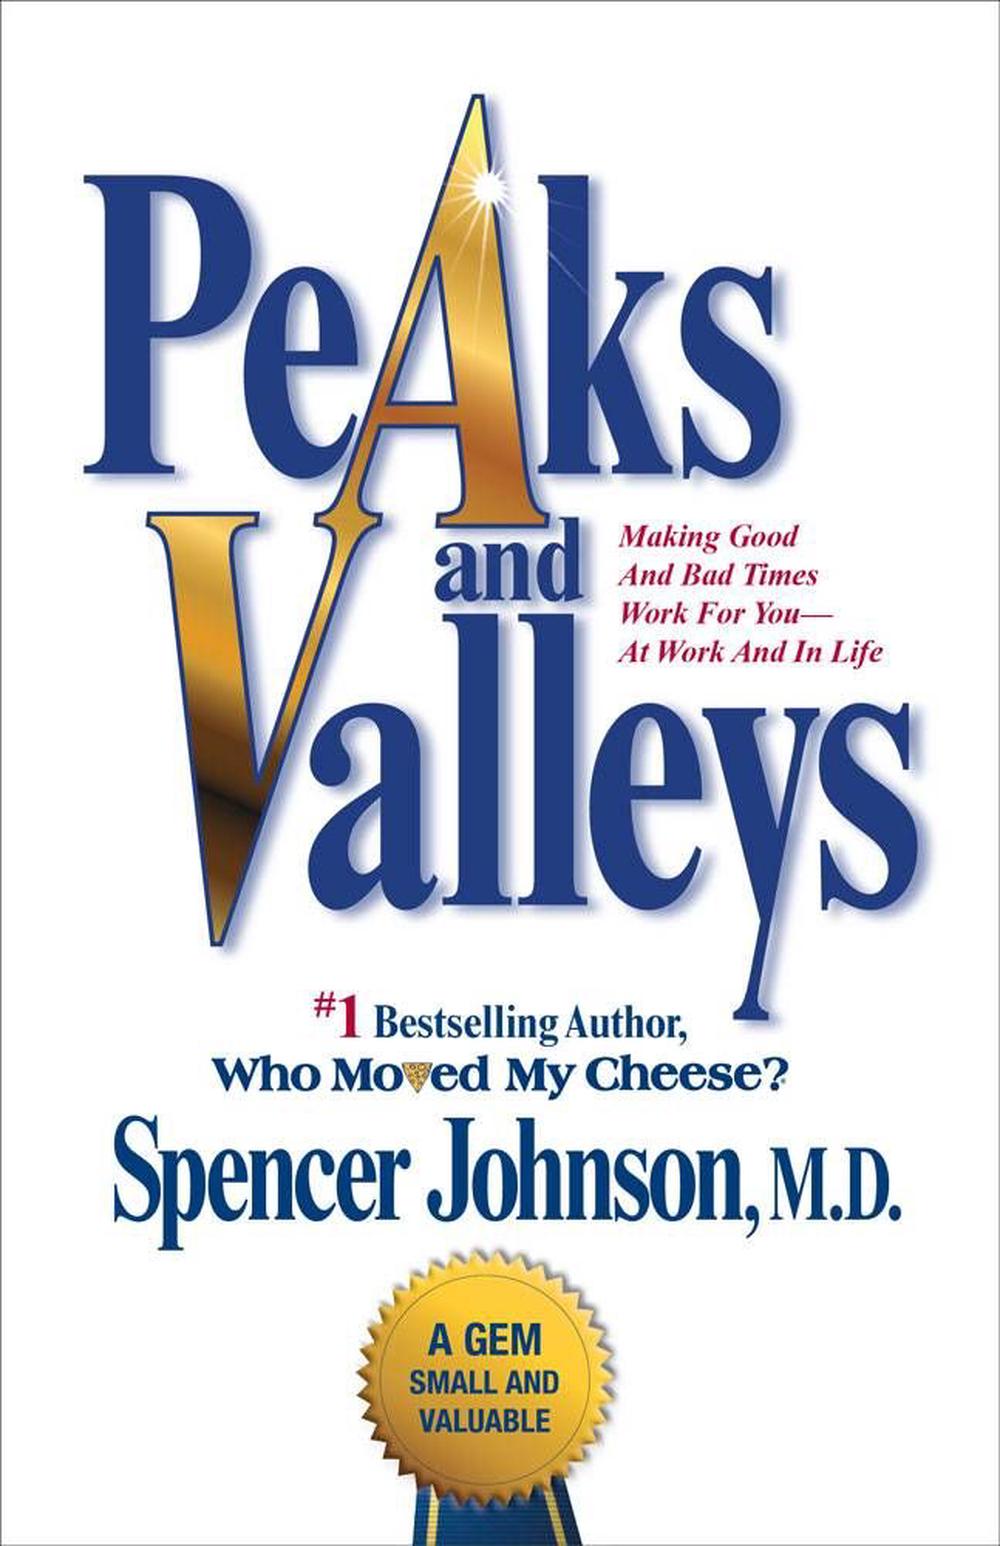 Peaks and Valleys Making Good and Bad Times Work for YouAt Work and in Life by Spencer